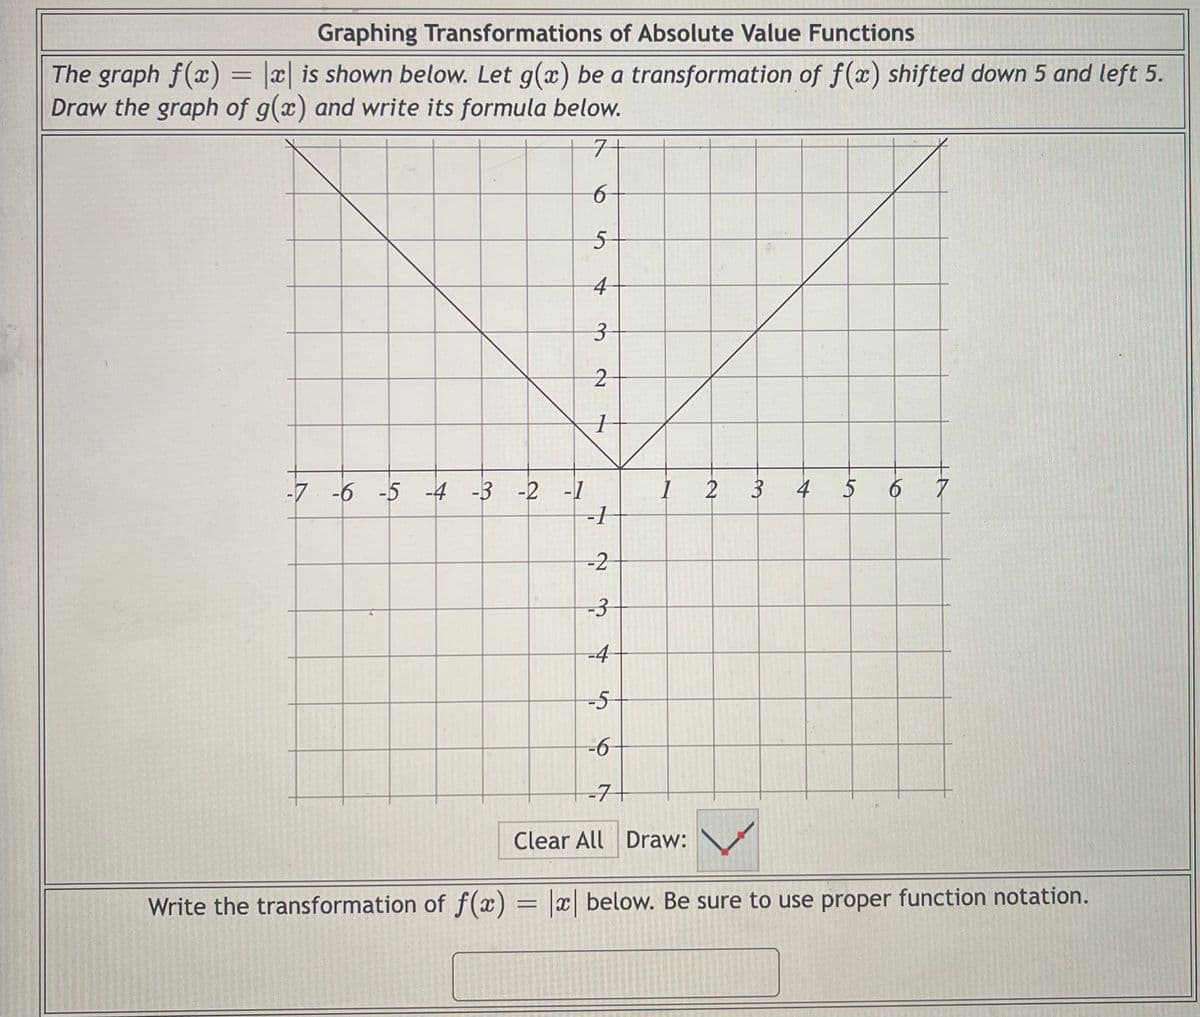 Graphing Transformations of Absolute Value Functions
The graph f(x) = |x| is shown below. Let g(x) be a transformation of f(x) shifted down 5 and left 5.
Draw the graph of g(x) and write its formula below.
구
4
3
4
5
7
-7 -6 -5 -4 -3 -2 -1
-1
-2
-3
-4
-5
-7+
Clear All Draw:
Write the transformation of f(x) = x| below. Be sure to use proper function notation.
to
3.
2.
